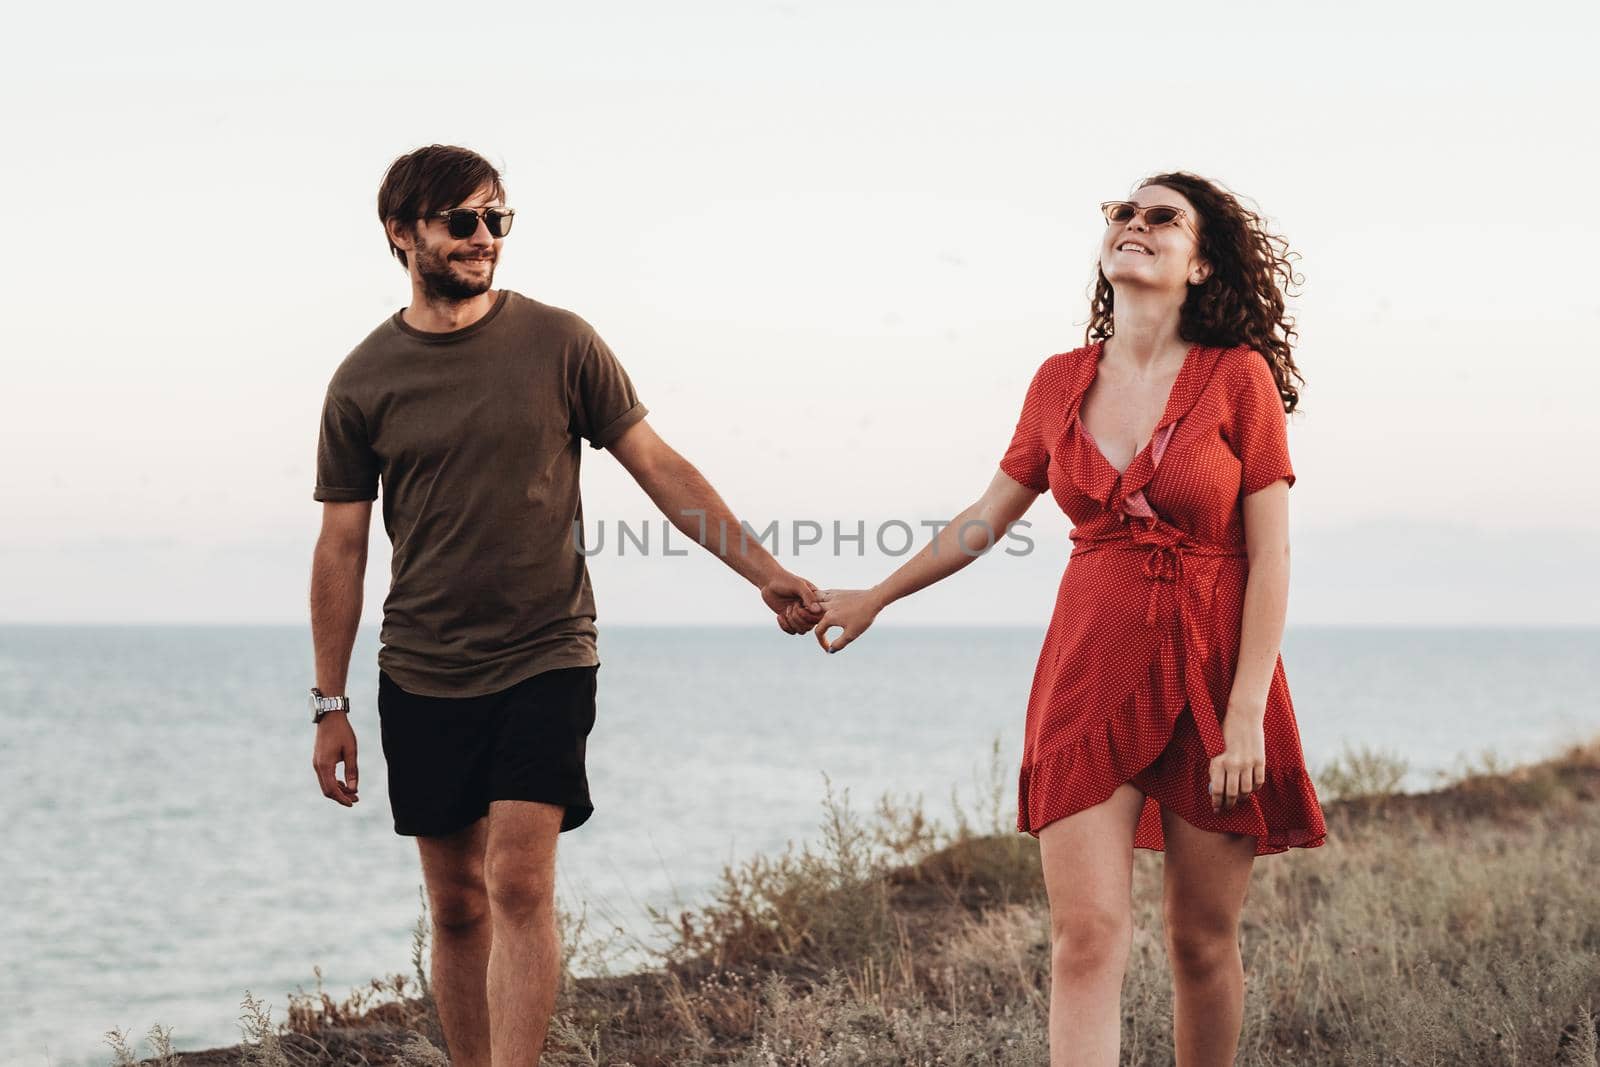 Cheerful Couple Walking Along Sea, Man and Curly Woman in Red Dress Holding by Hands Enjoying Their Vacation